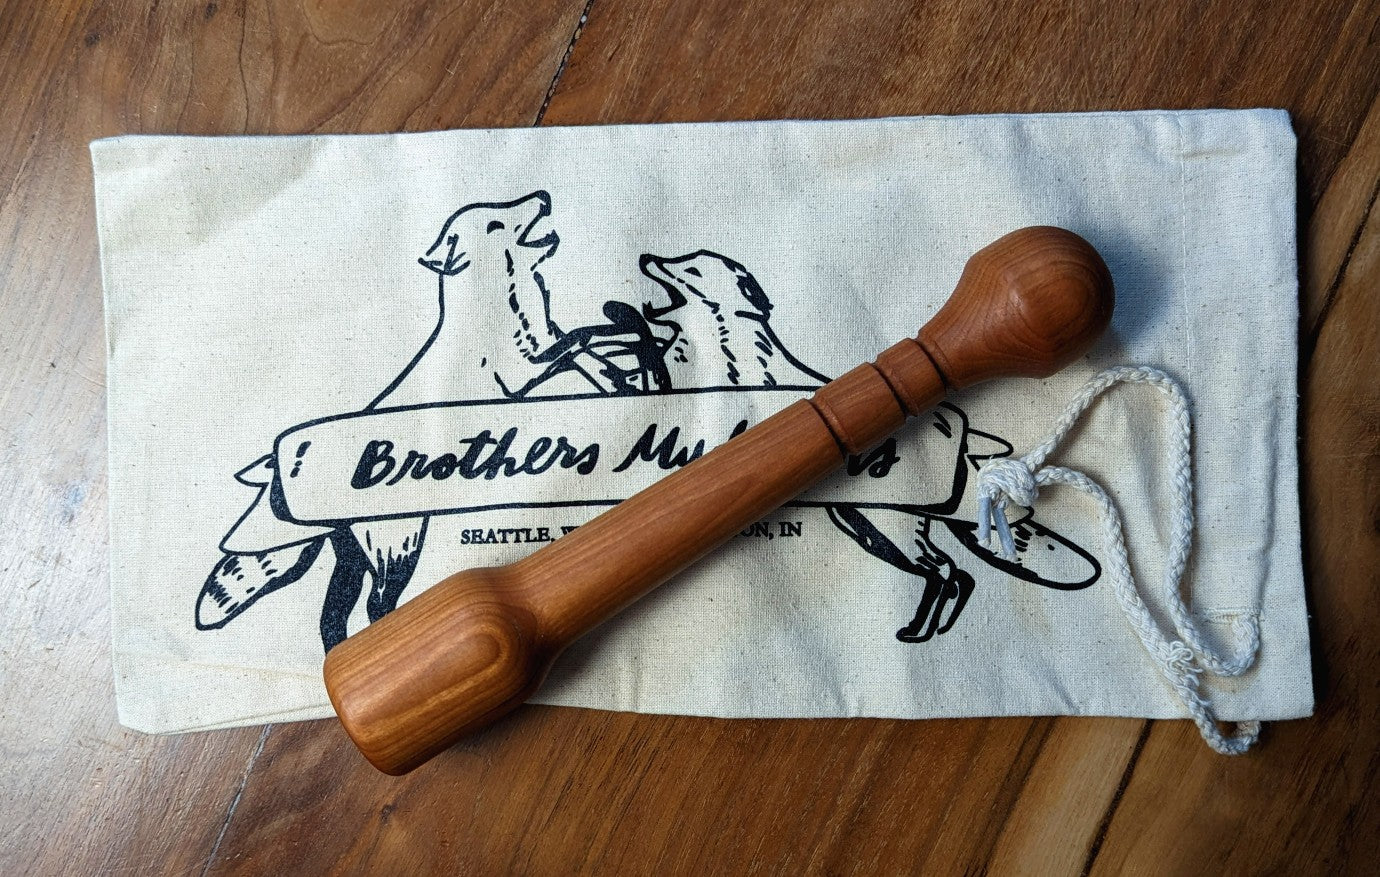 The Kirkwood - Cherry - American Made Cocktail Muddler